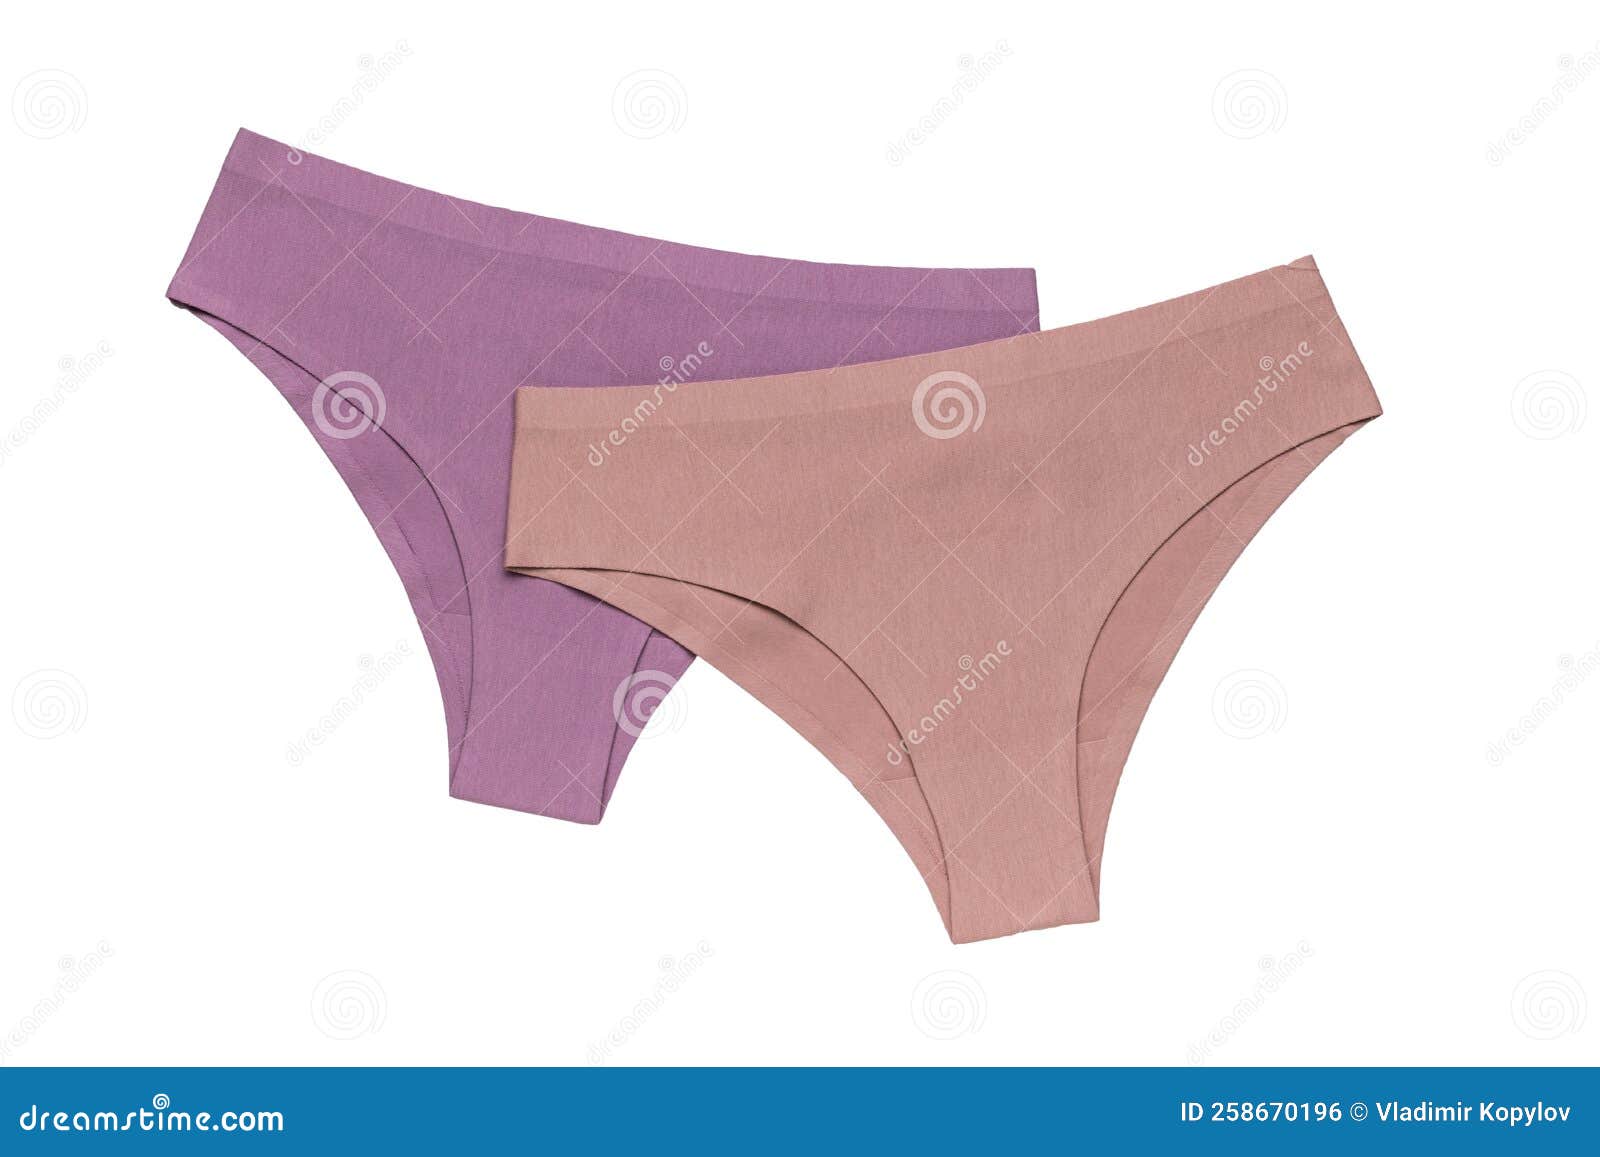 Premium Photo  Two seamless women's panties isolated on a white background  the concept of women's underwear